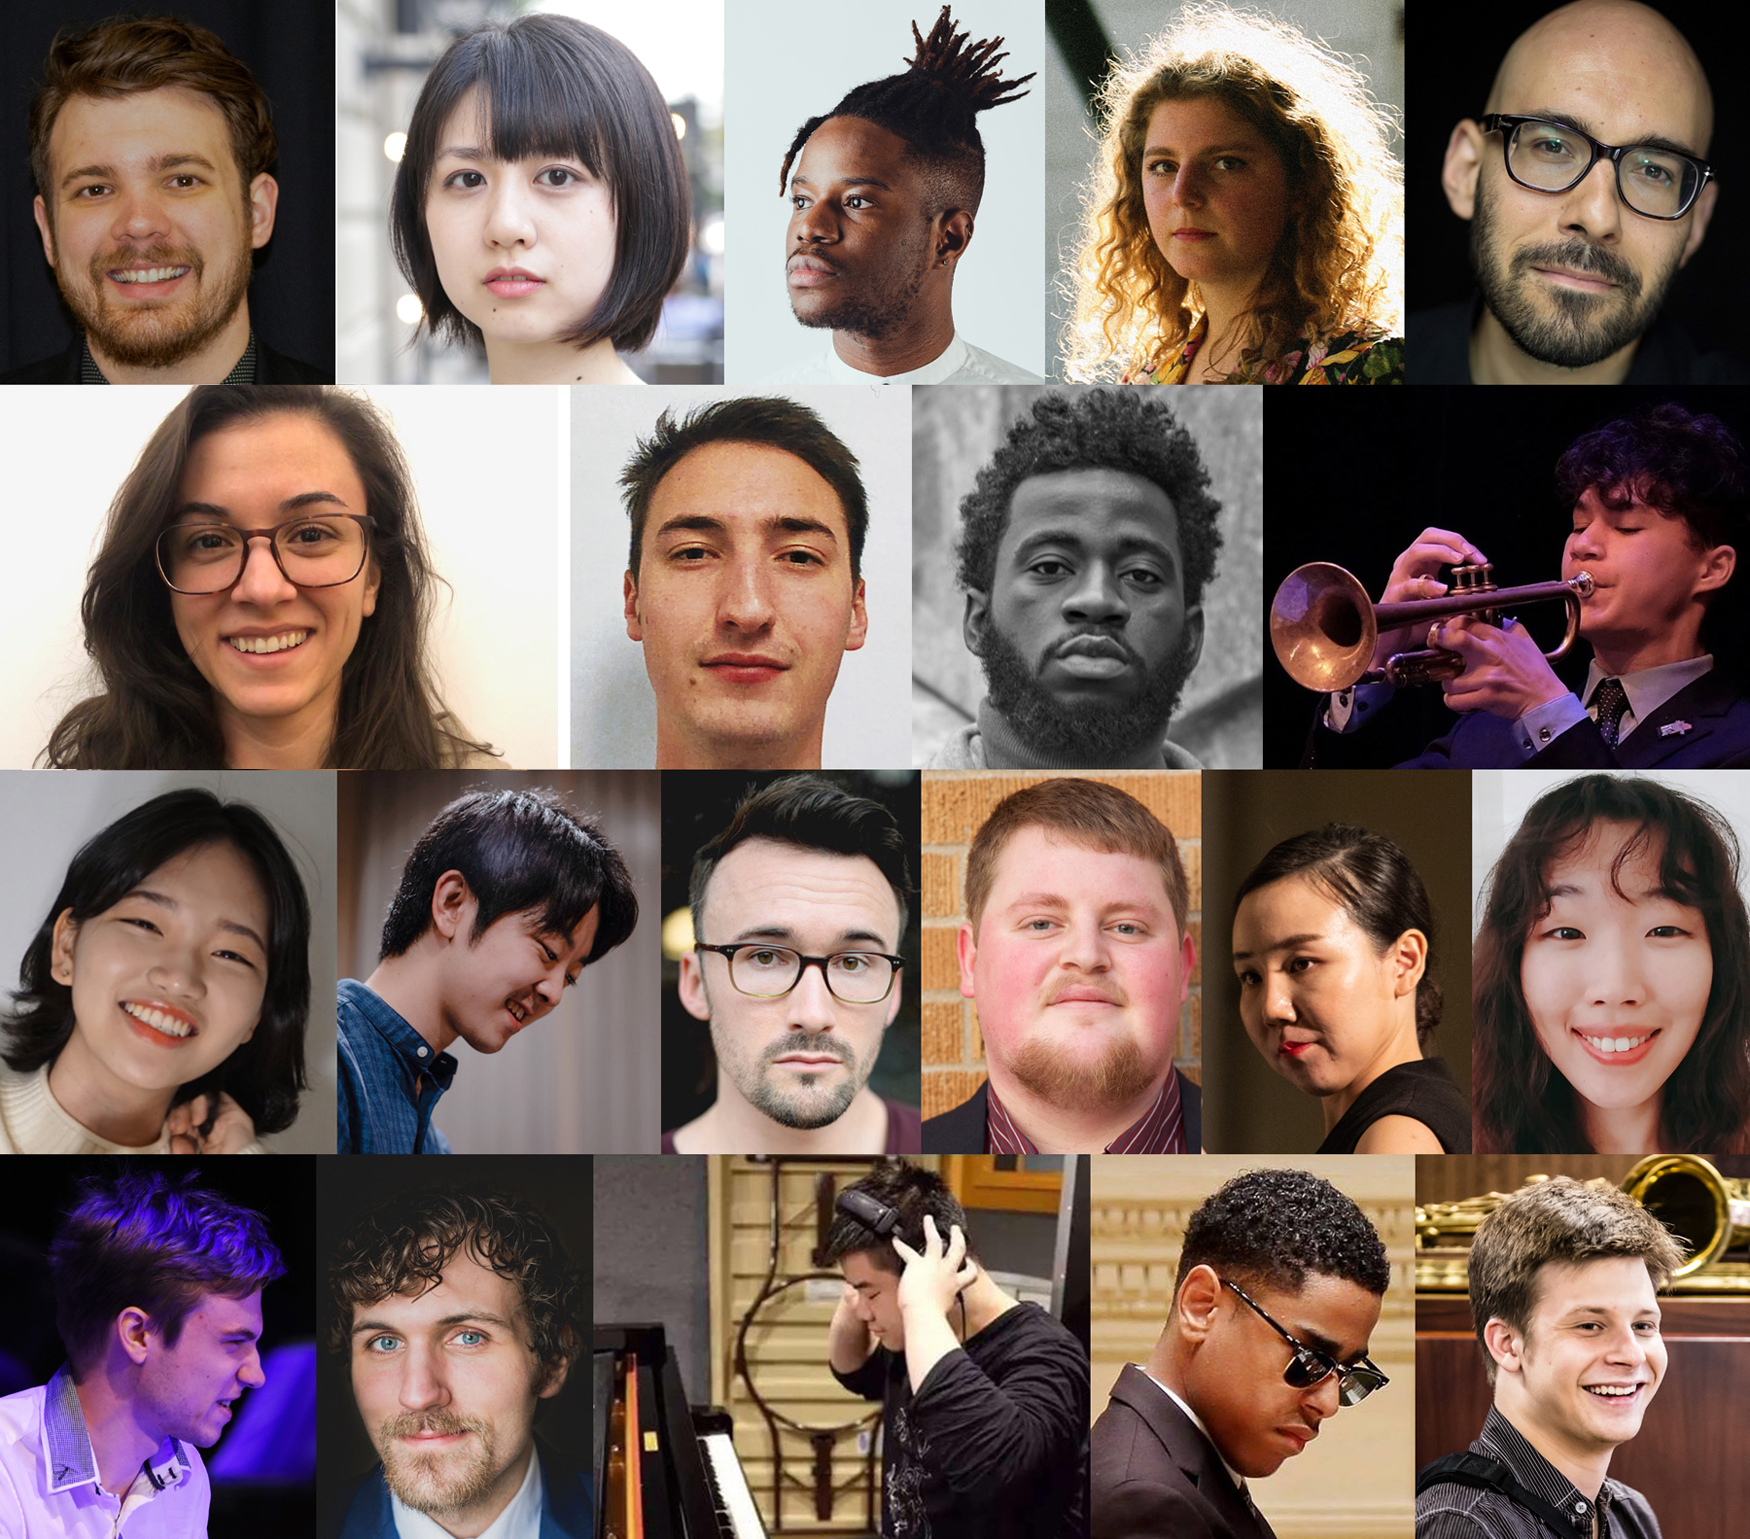 Headshots of the 20 winners of the 2020 ASCAP Foundation Herb Alpert Young Jazz Composer Awards